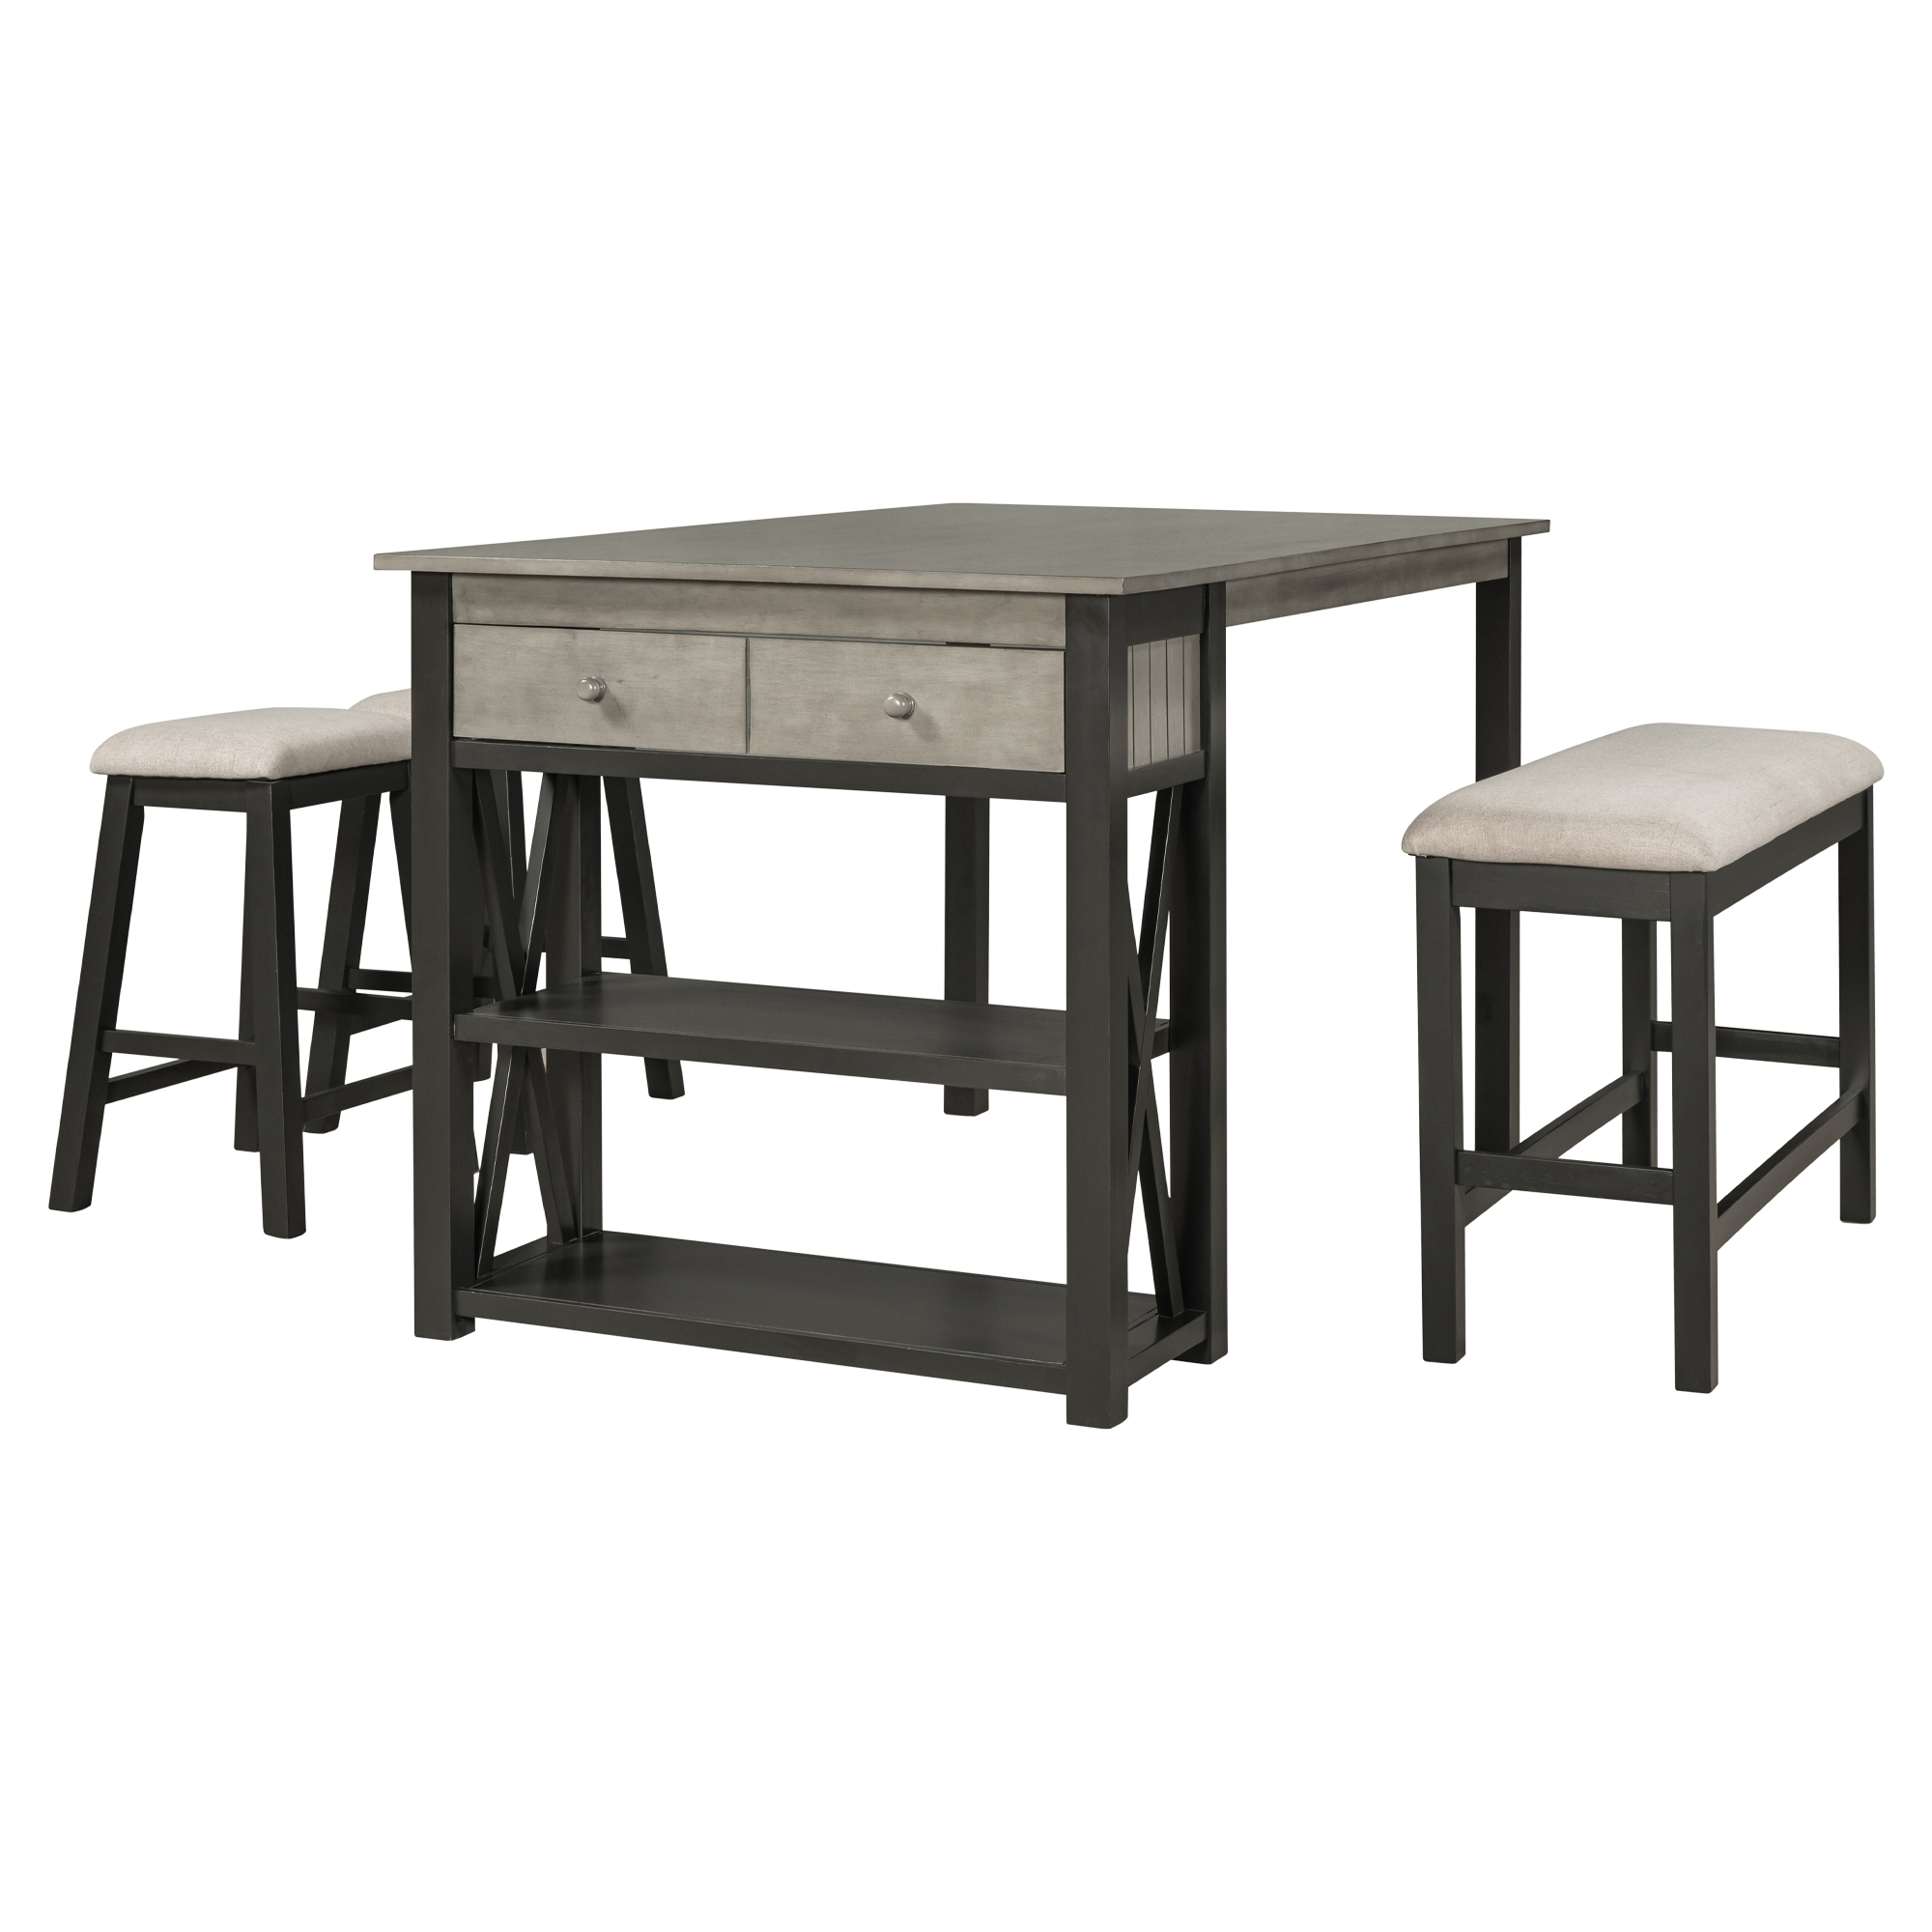 Rustic Wood 4-Piece Counter Height Dining Table Set with Storage Shelves and Drawer, Kitchen Table Set with 2 Stools and Bench， Gray